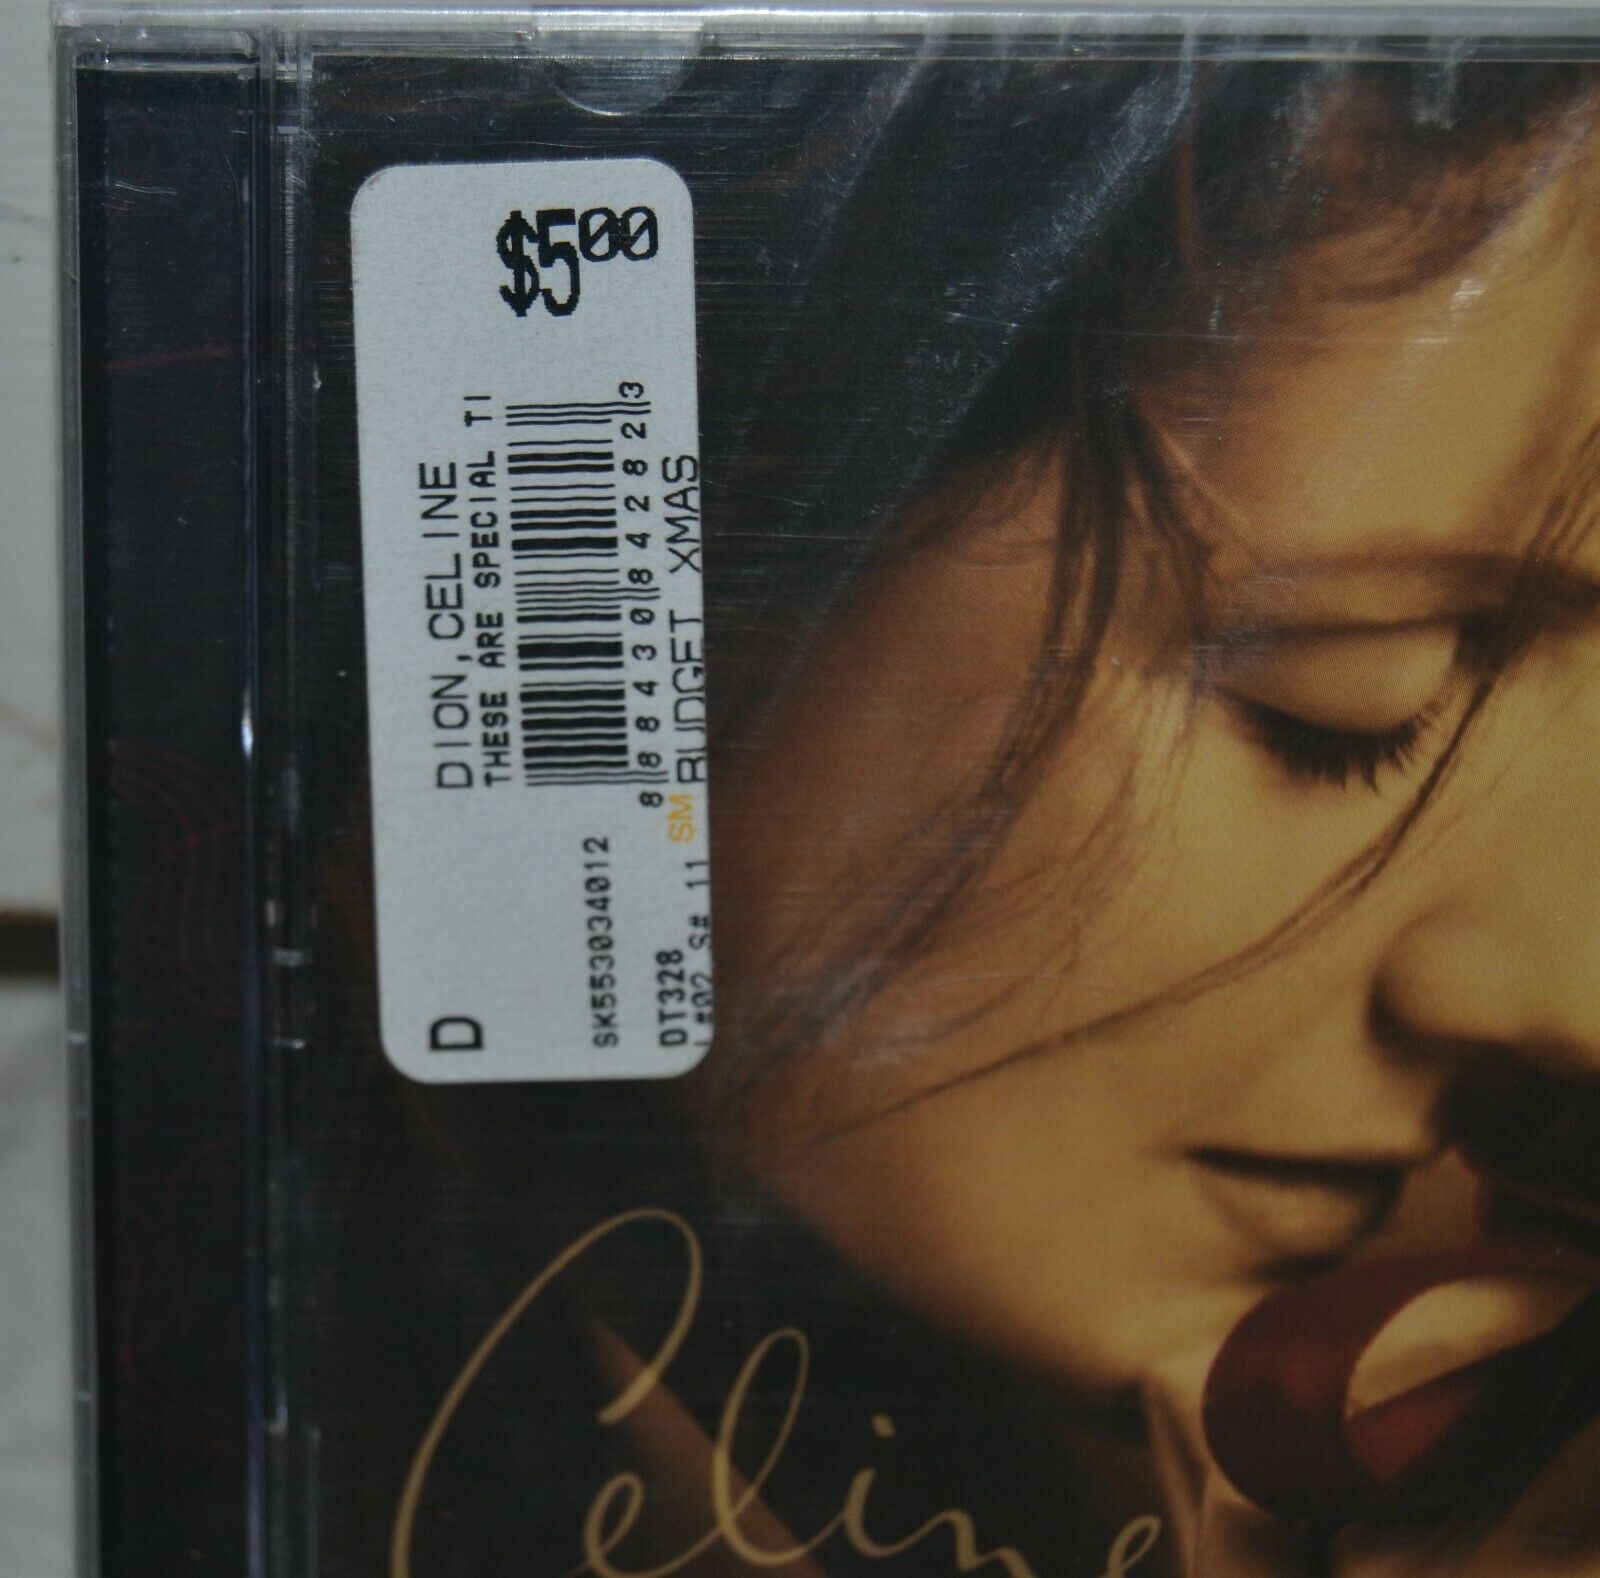 Celine Dion - These Are Special Times (2009) Christmas CD Album - CDs